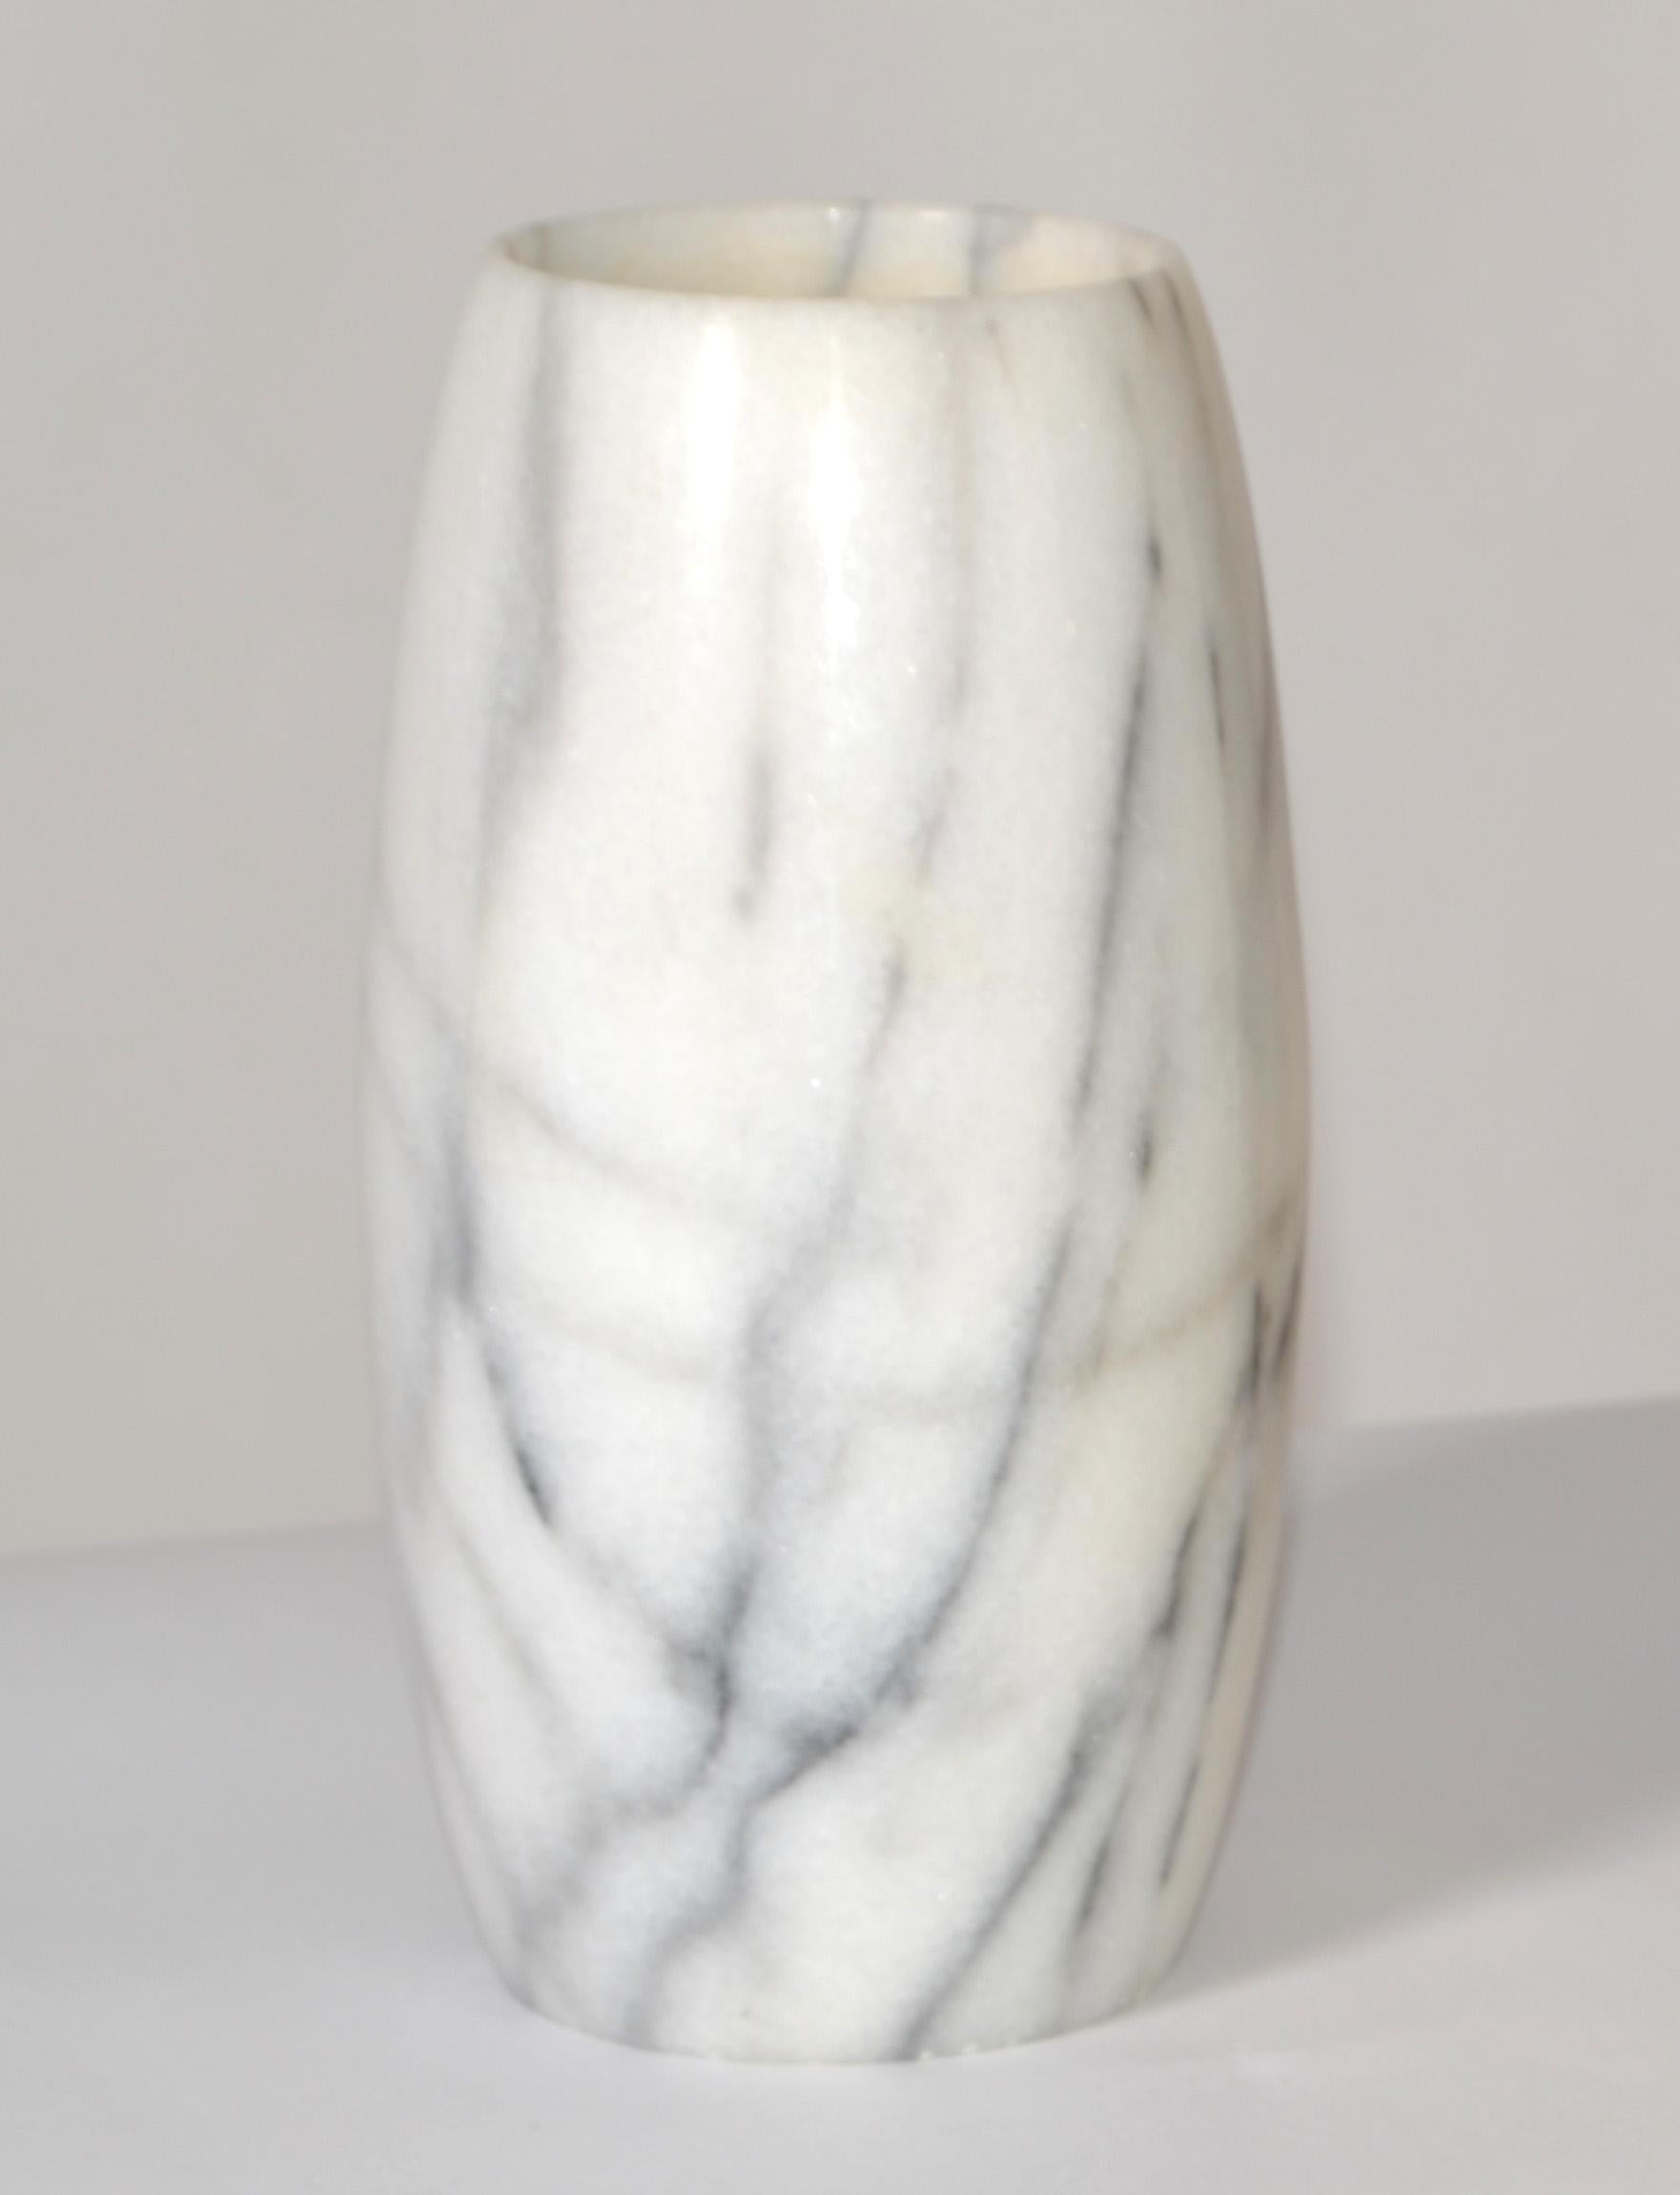 20th century Mid-Century Modern hand carved veined white Carrara marble vase, vessel made in Italy.
This Vase is amazingly crafted, very decorative on a Classic Italian Table.
In very good vintage condition with some minor wear due to use at the